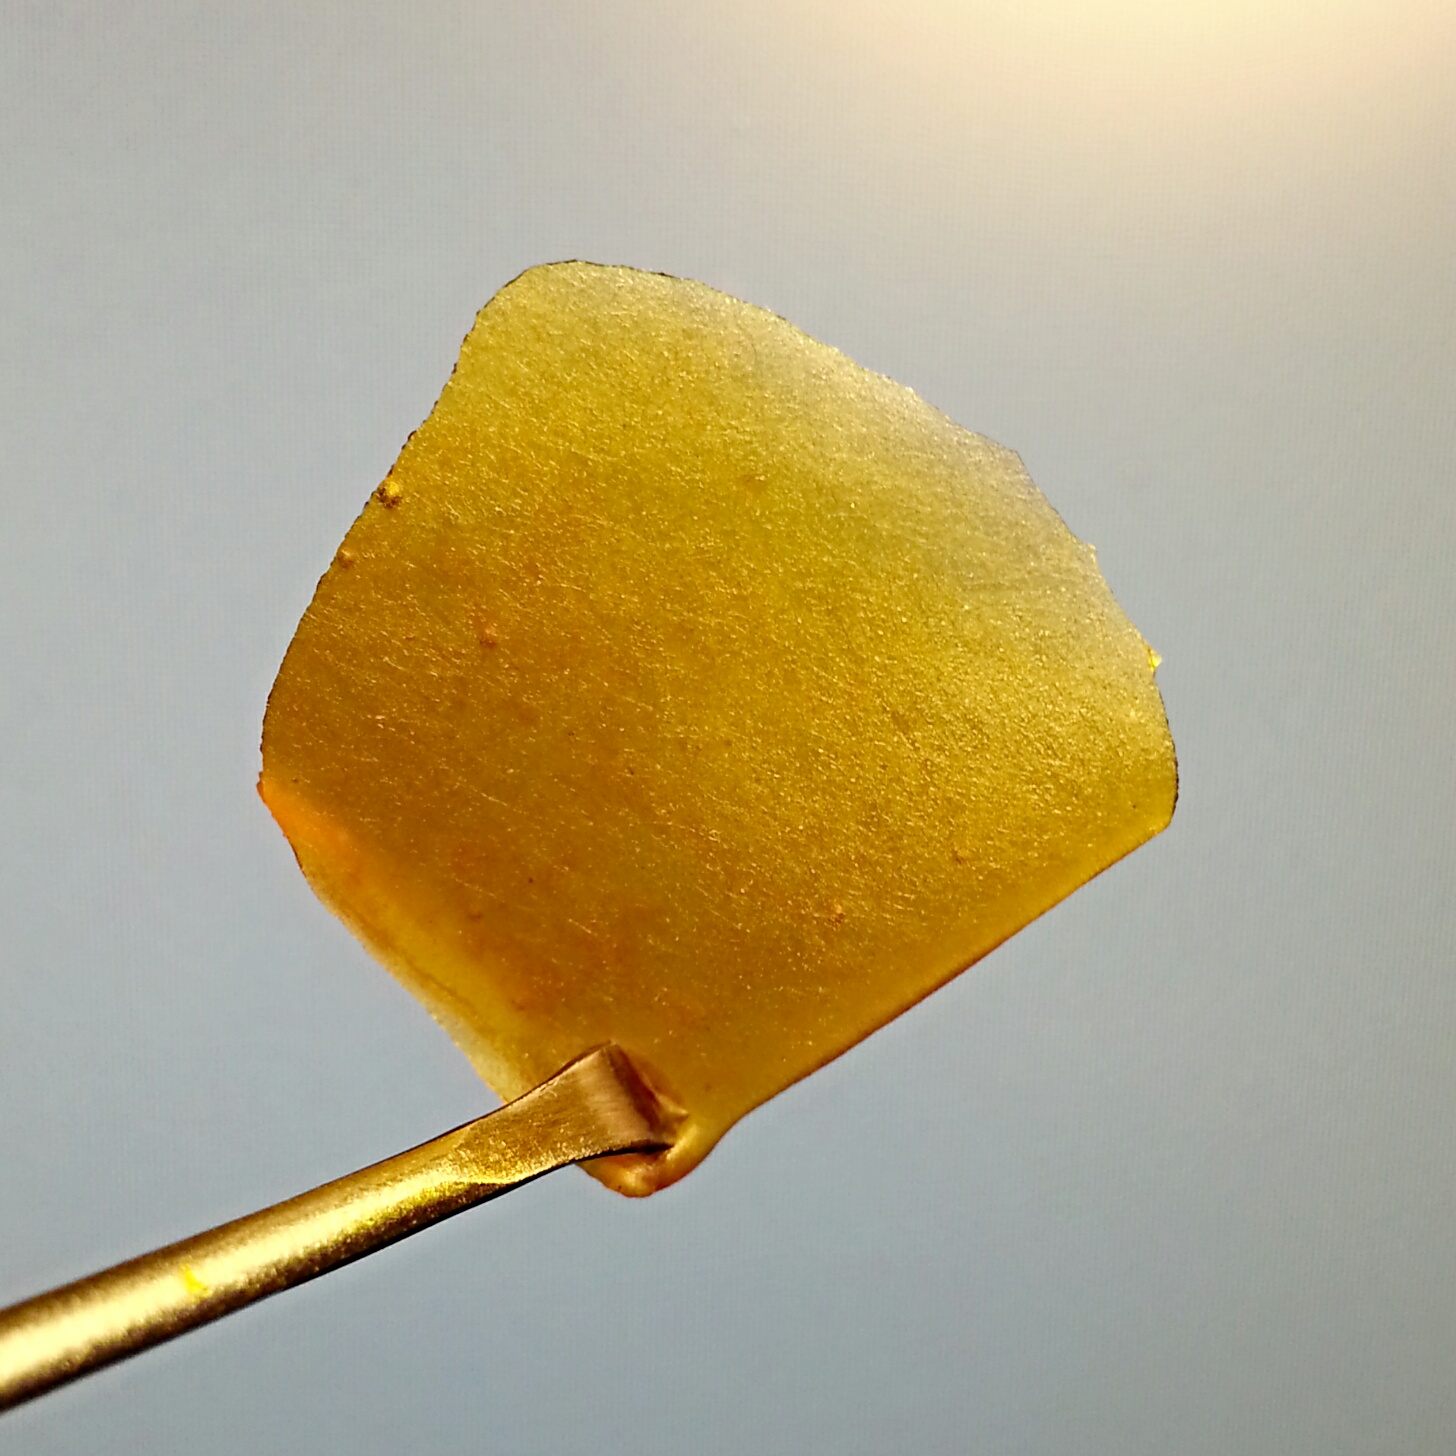 Jilly Bean Shatter from Second Story Concentrate Review